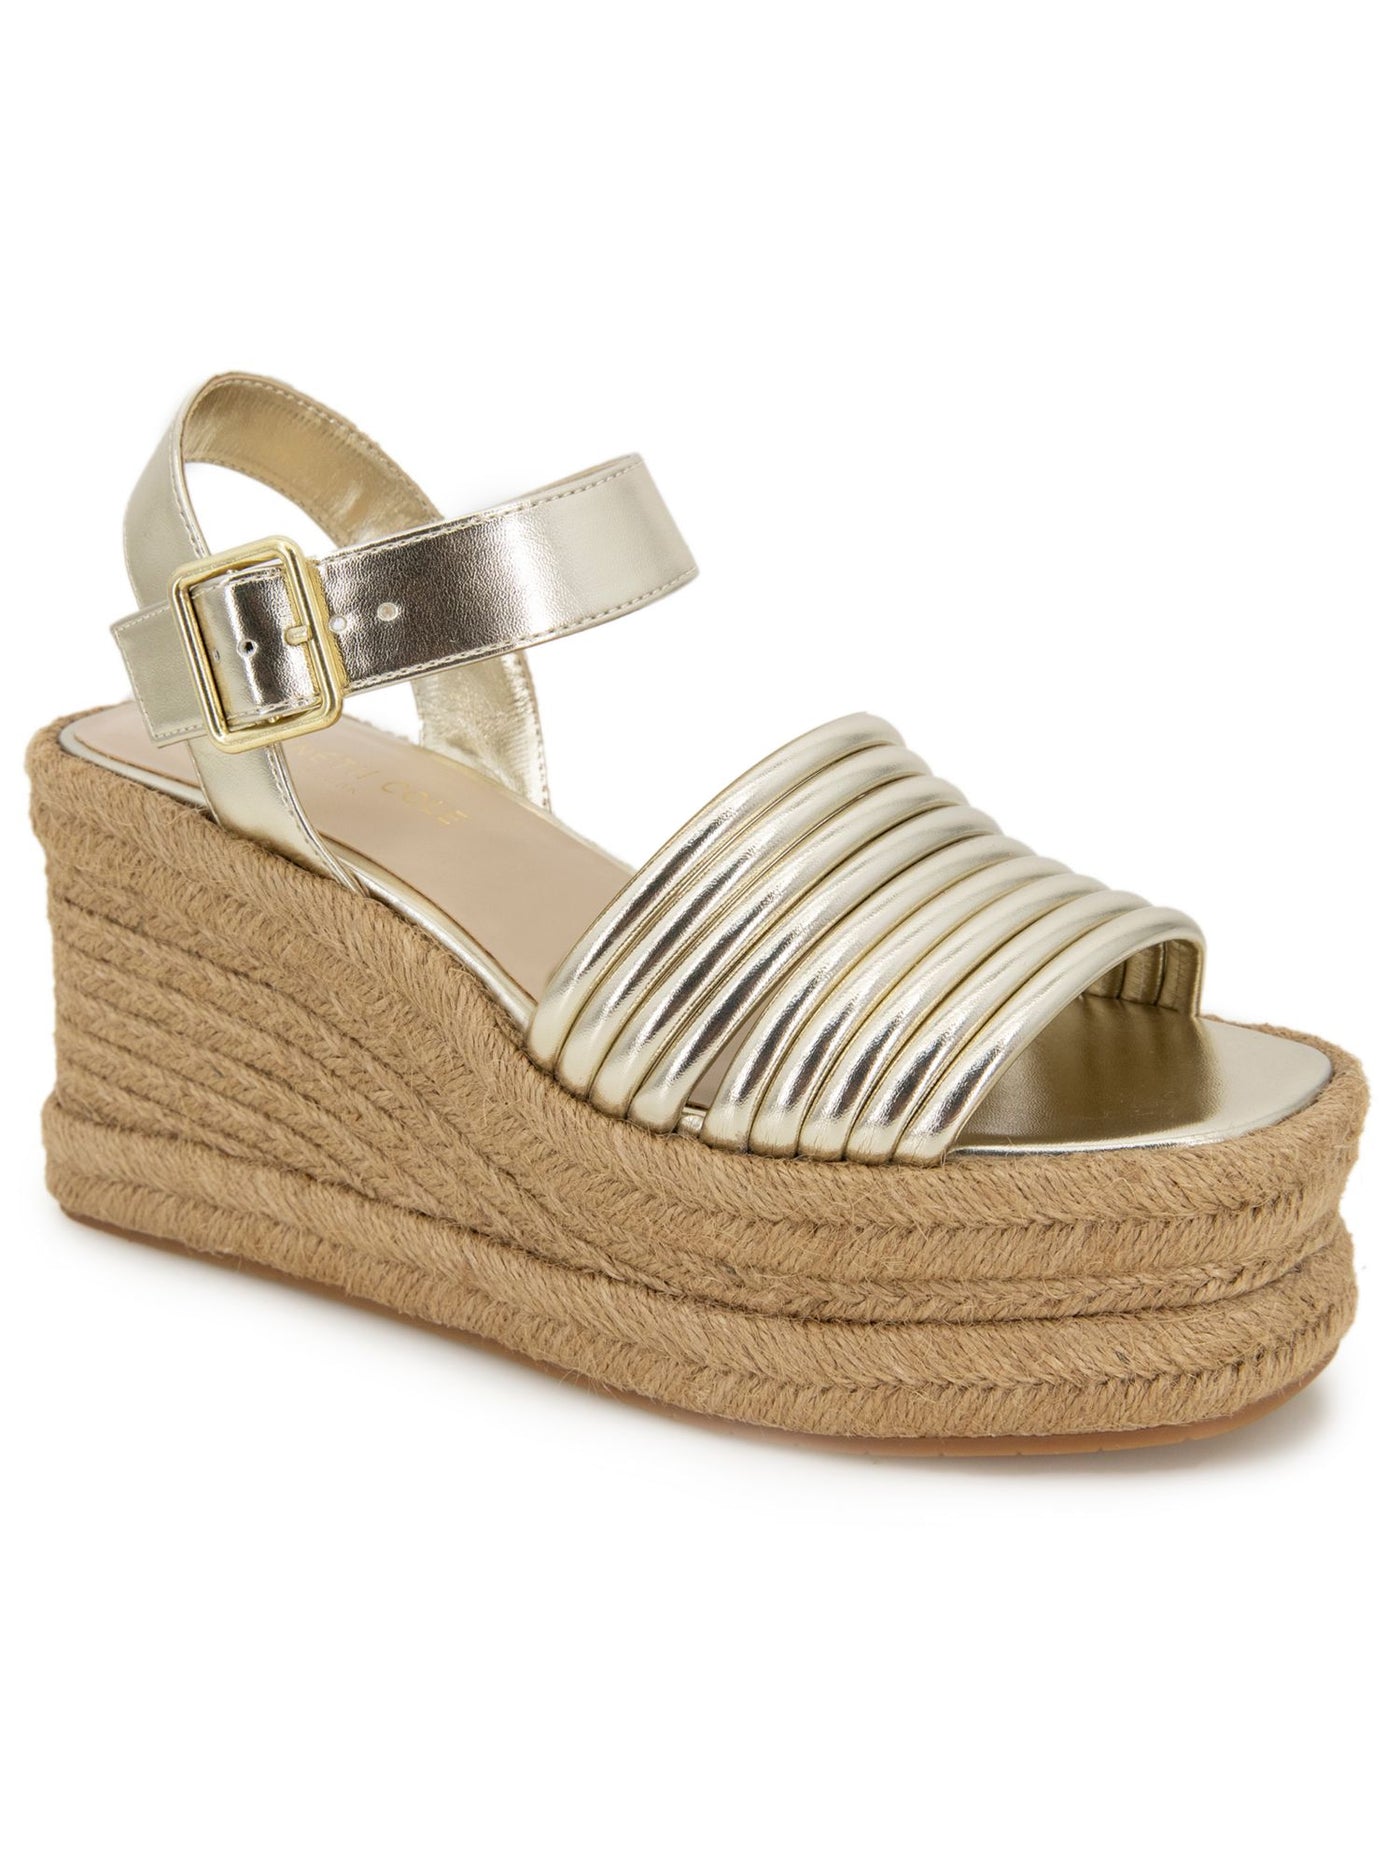 KENNETH COLE NEW YORK Womens Gold 2 Wedge Adjustable Ankle Strap Strappy Padded Shelby Open Toe Wedge Buckle Espadrille Shoes 5 M